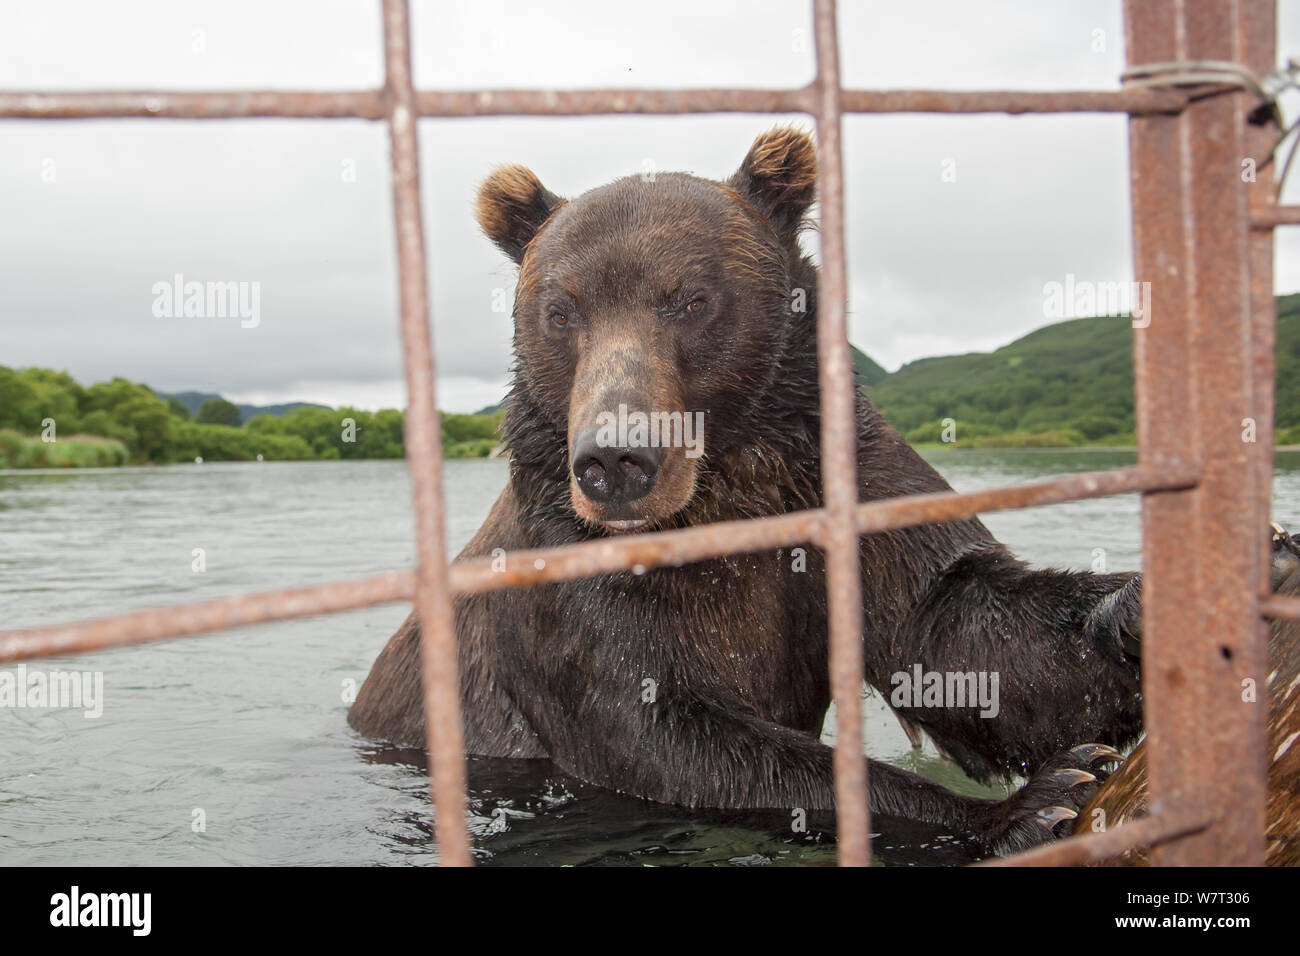 Kamchatka brown bear (Ursus arctos beringianus) in river, taken from protective cage, Kamchatka, Far East Russia. Stock Photo